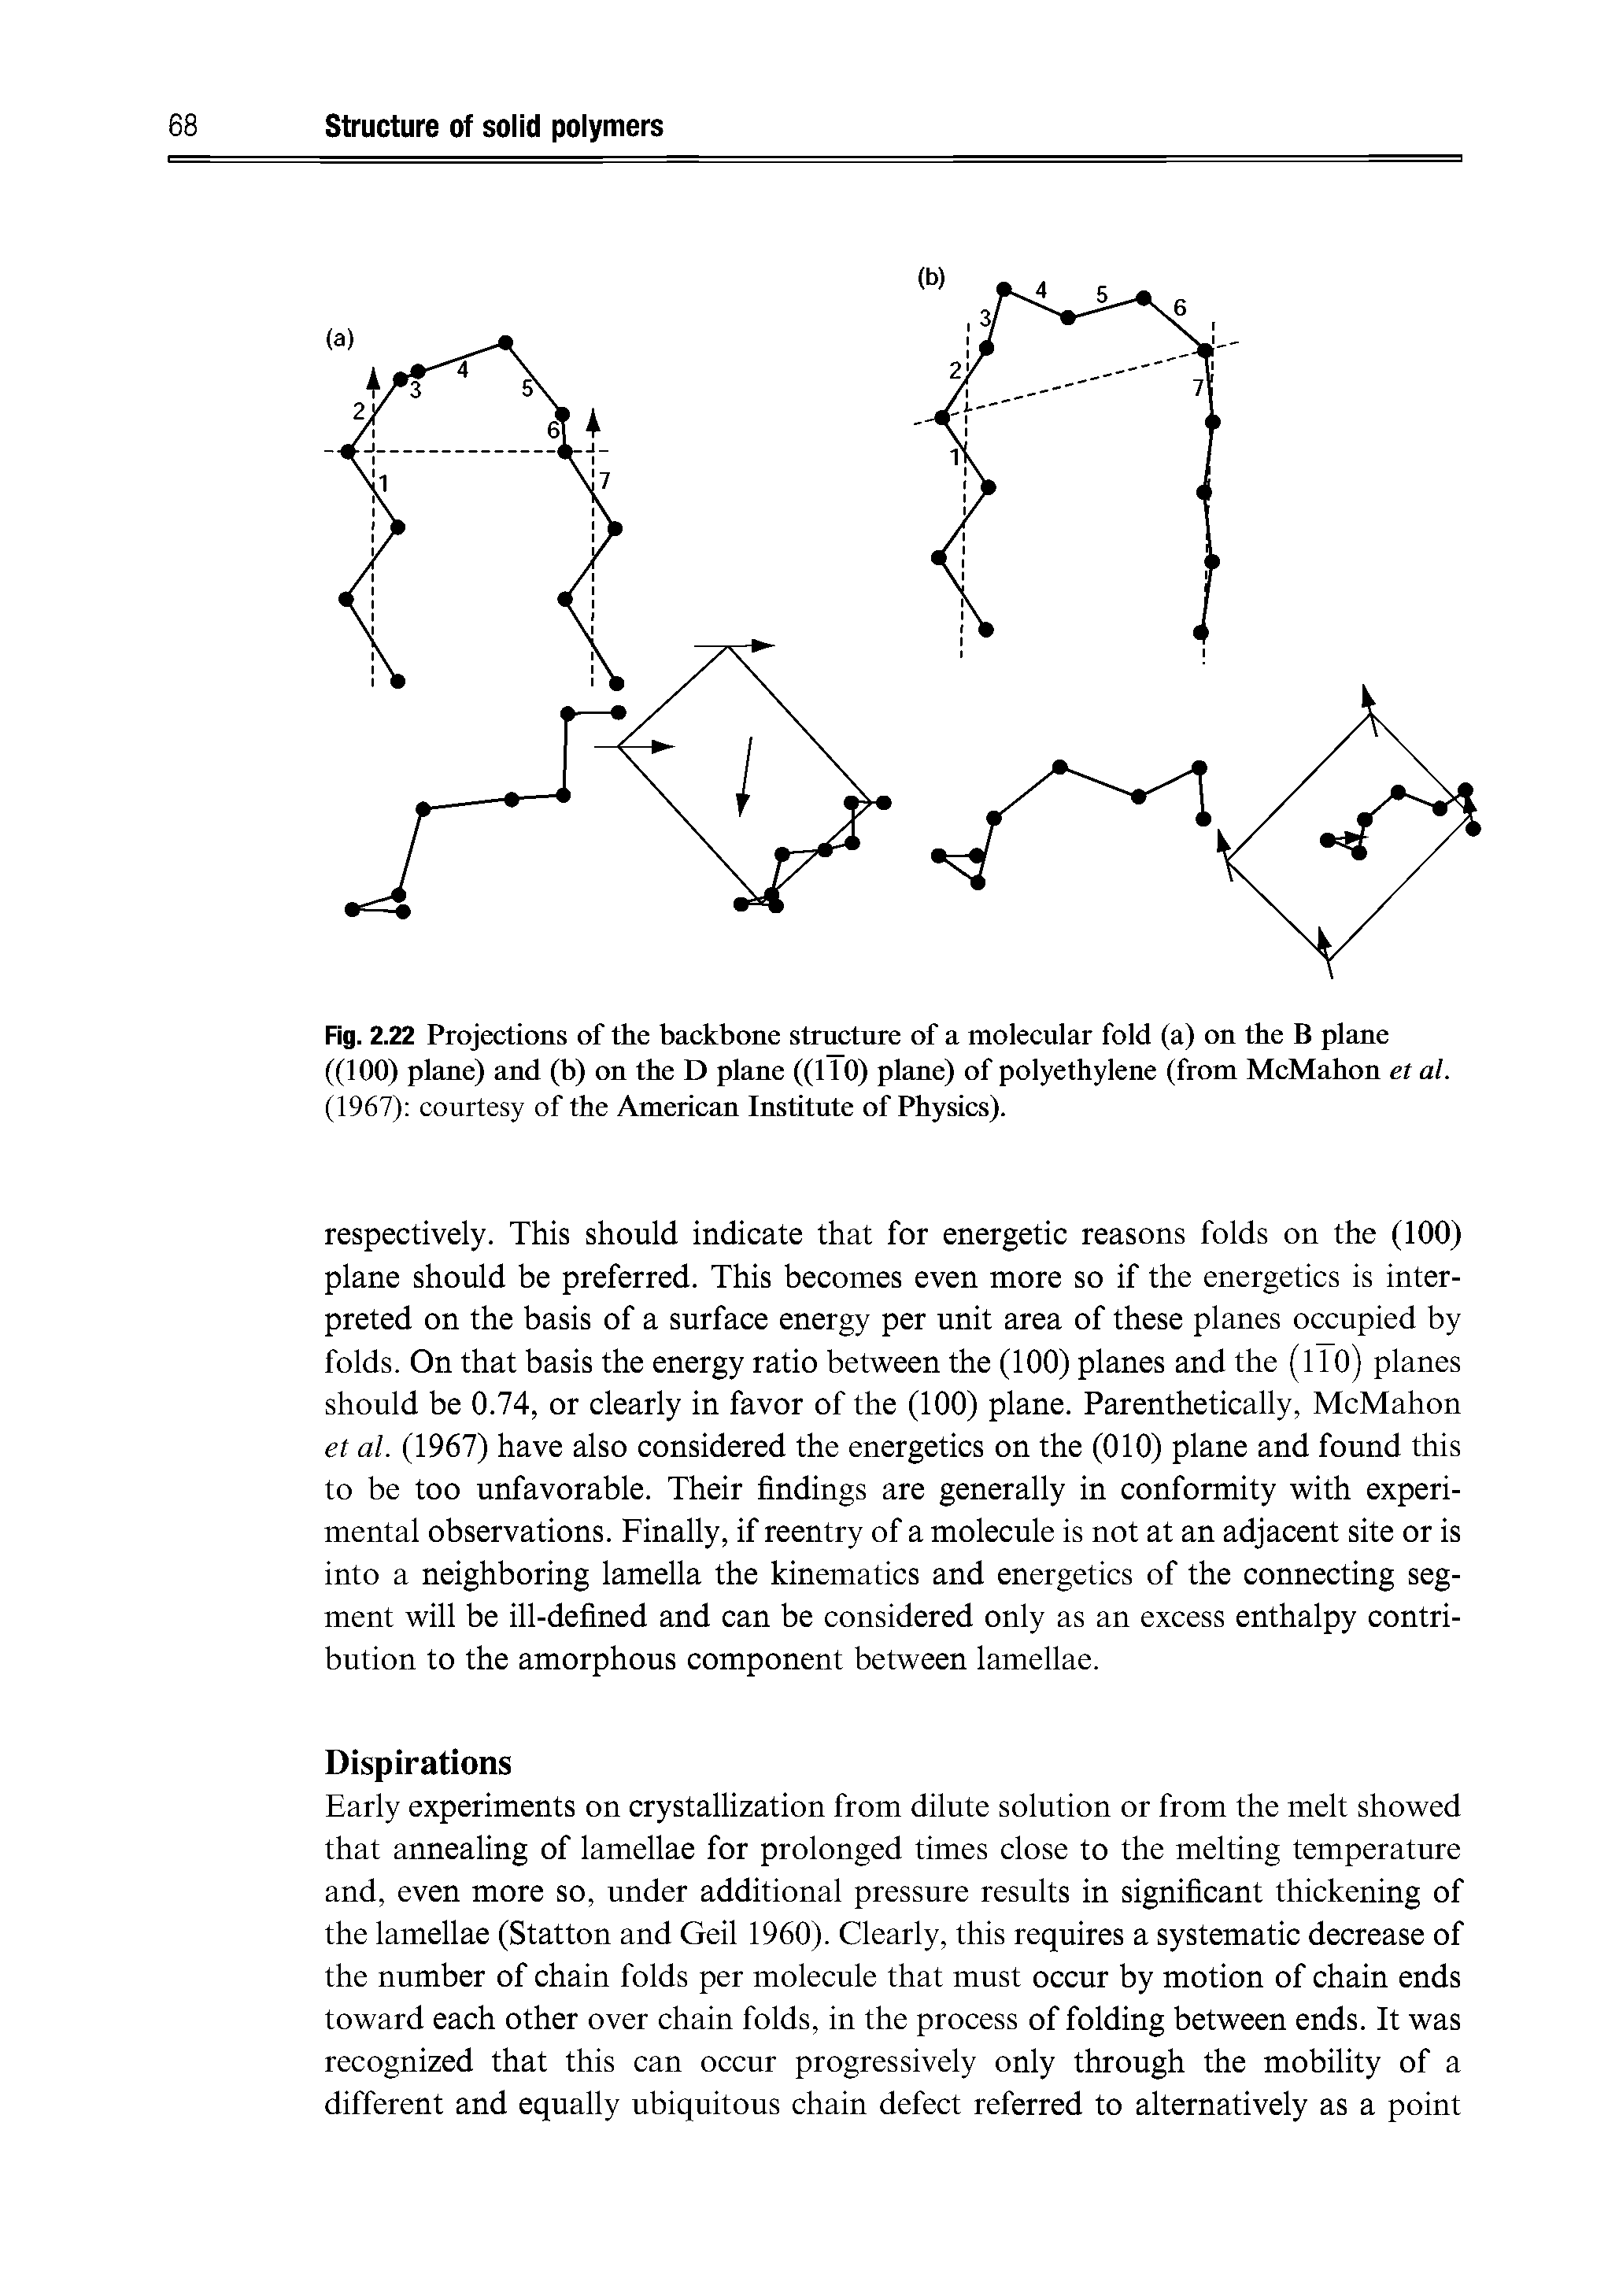 Fig. 2.22 Projections of the backbone structure of a molecular fold (a) on the B plane ((100) plane) and (b) on the D plane ((110) plane) of polyethylene (from McMahon etal. (1967) courtesy of the American Institute of Physics).